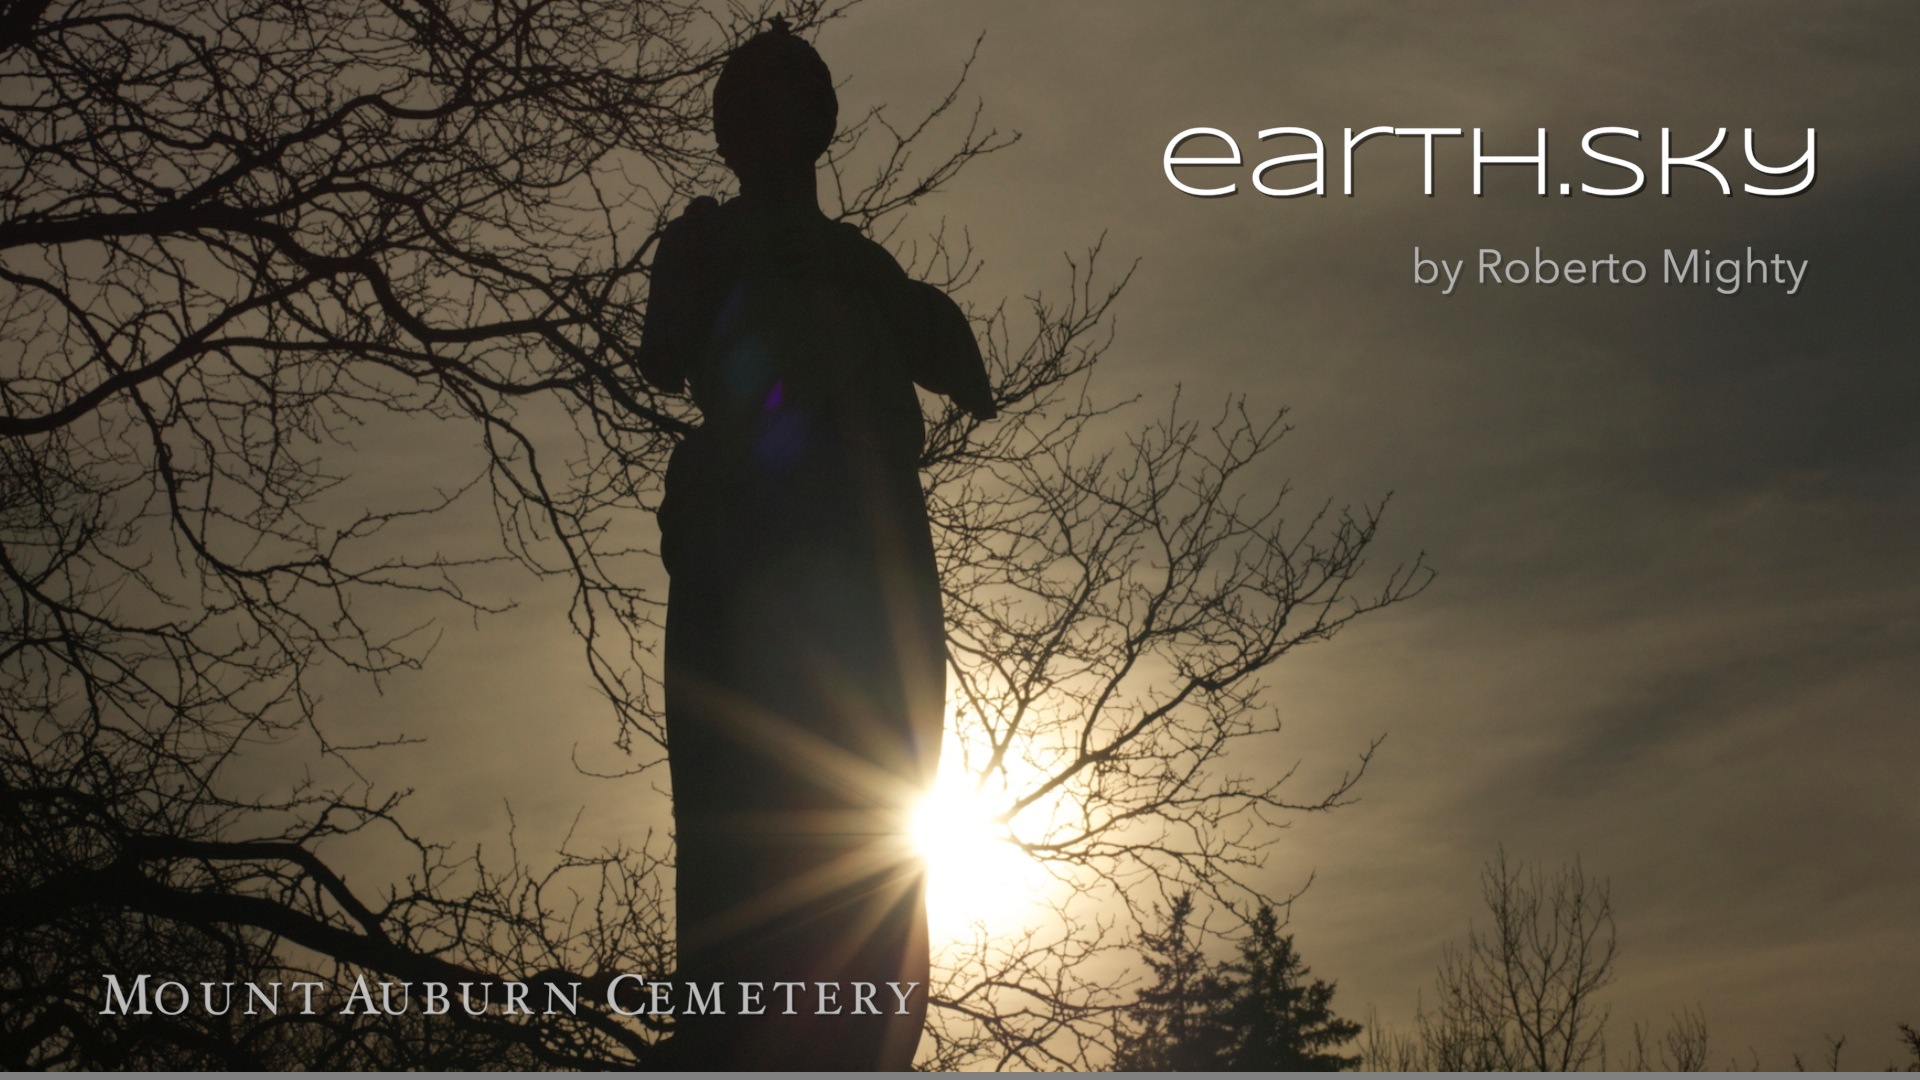 Image for Roberto Mighty’s earth.sky